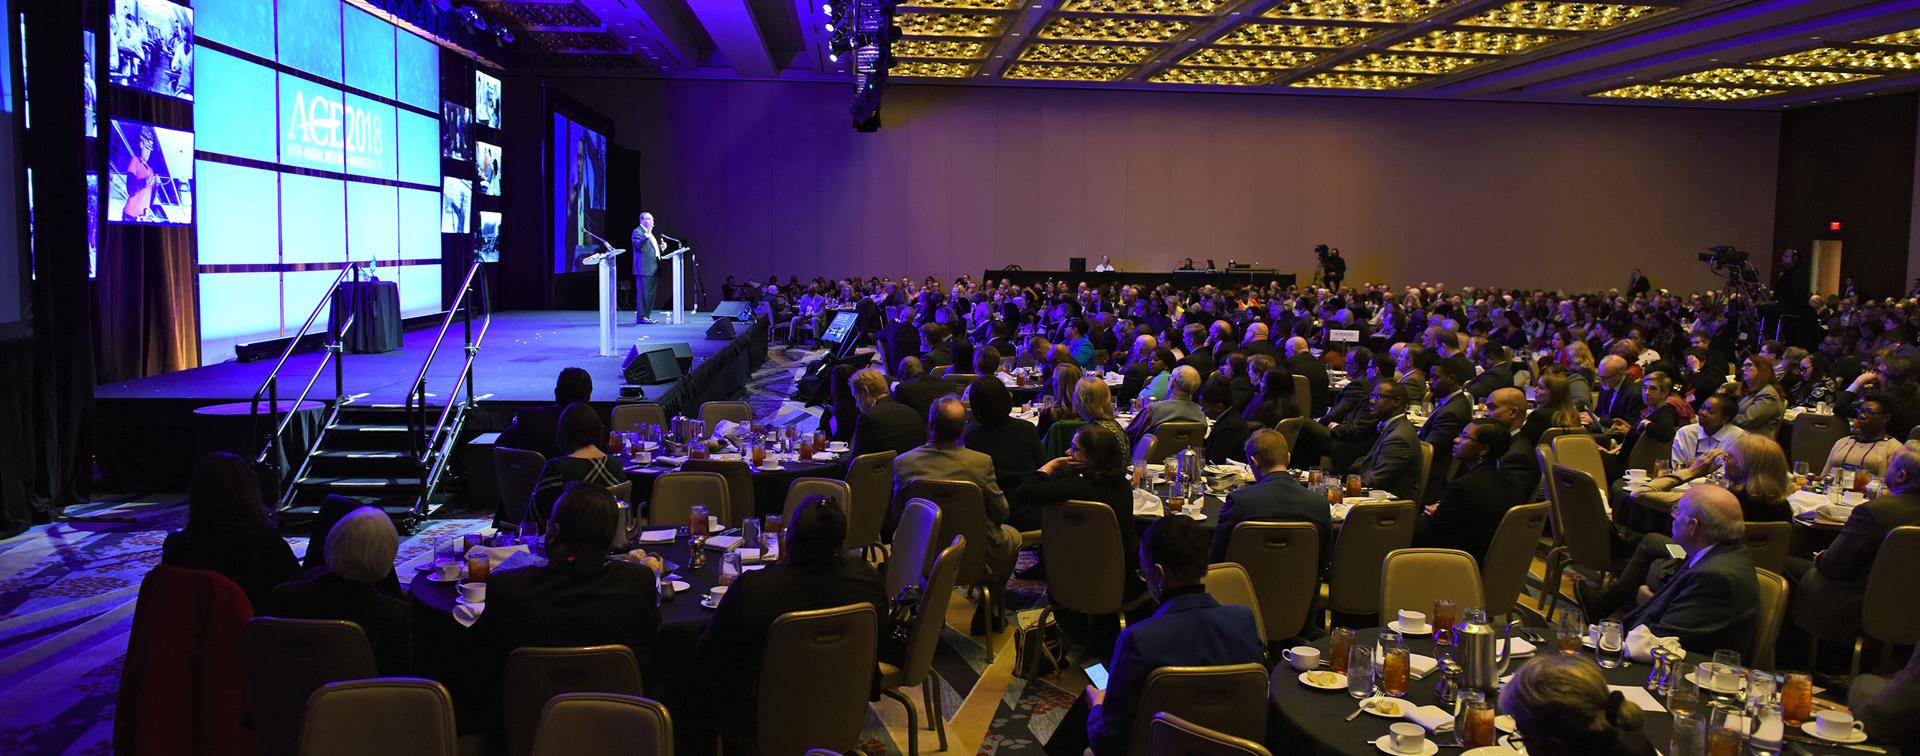 A picture of the crowd at ACE's Annual Meeting